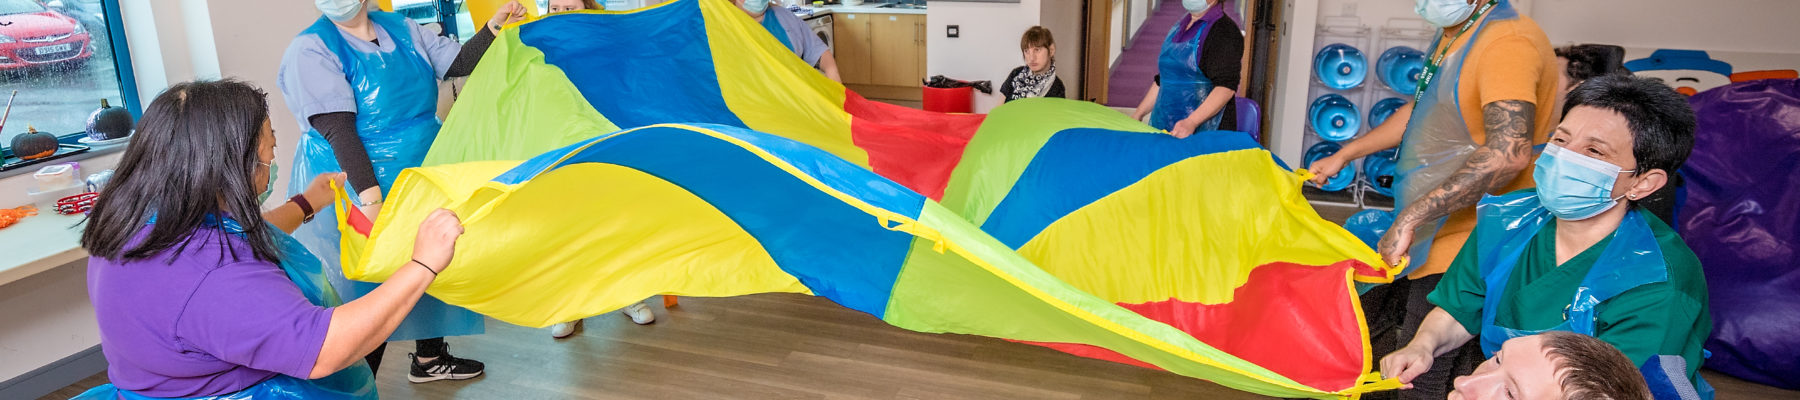 A group of people playing with a parachute at Sense Caerphilly.